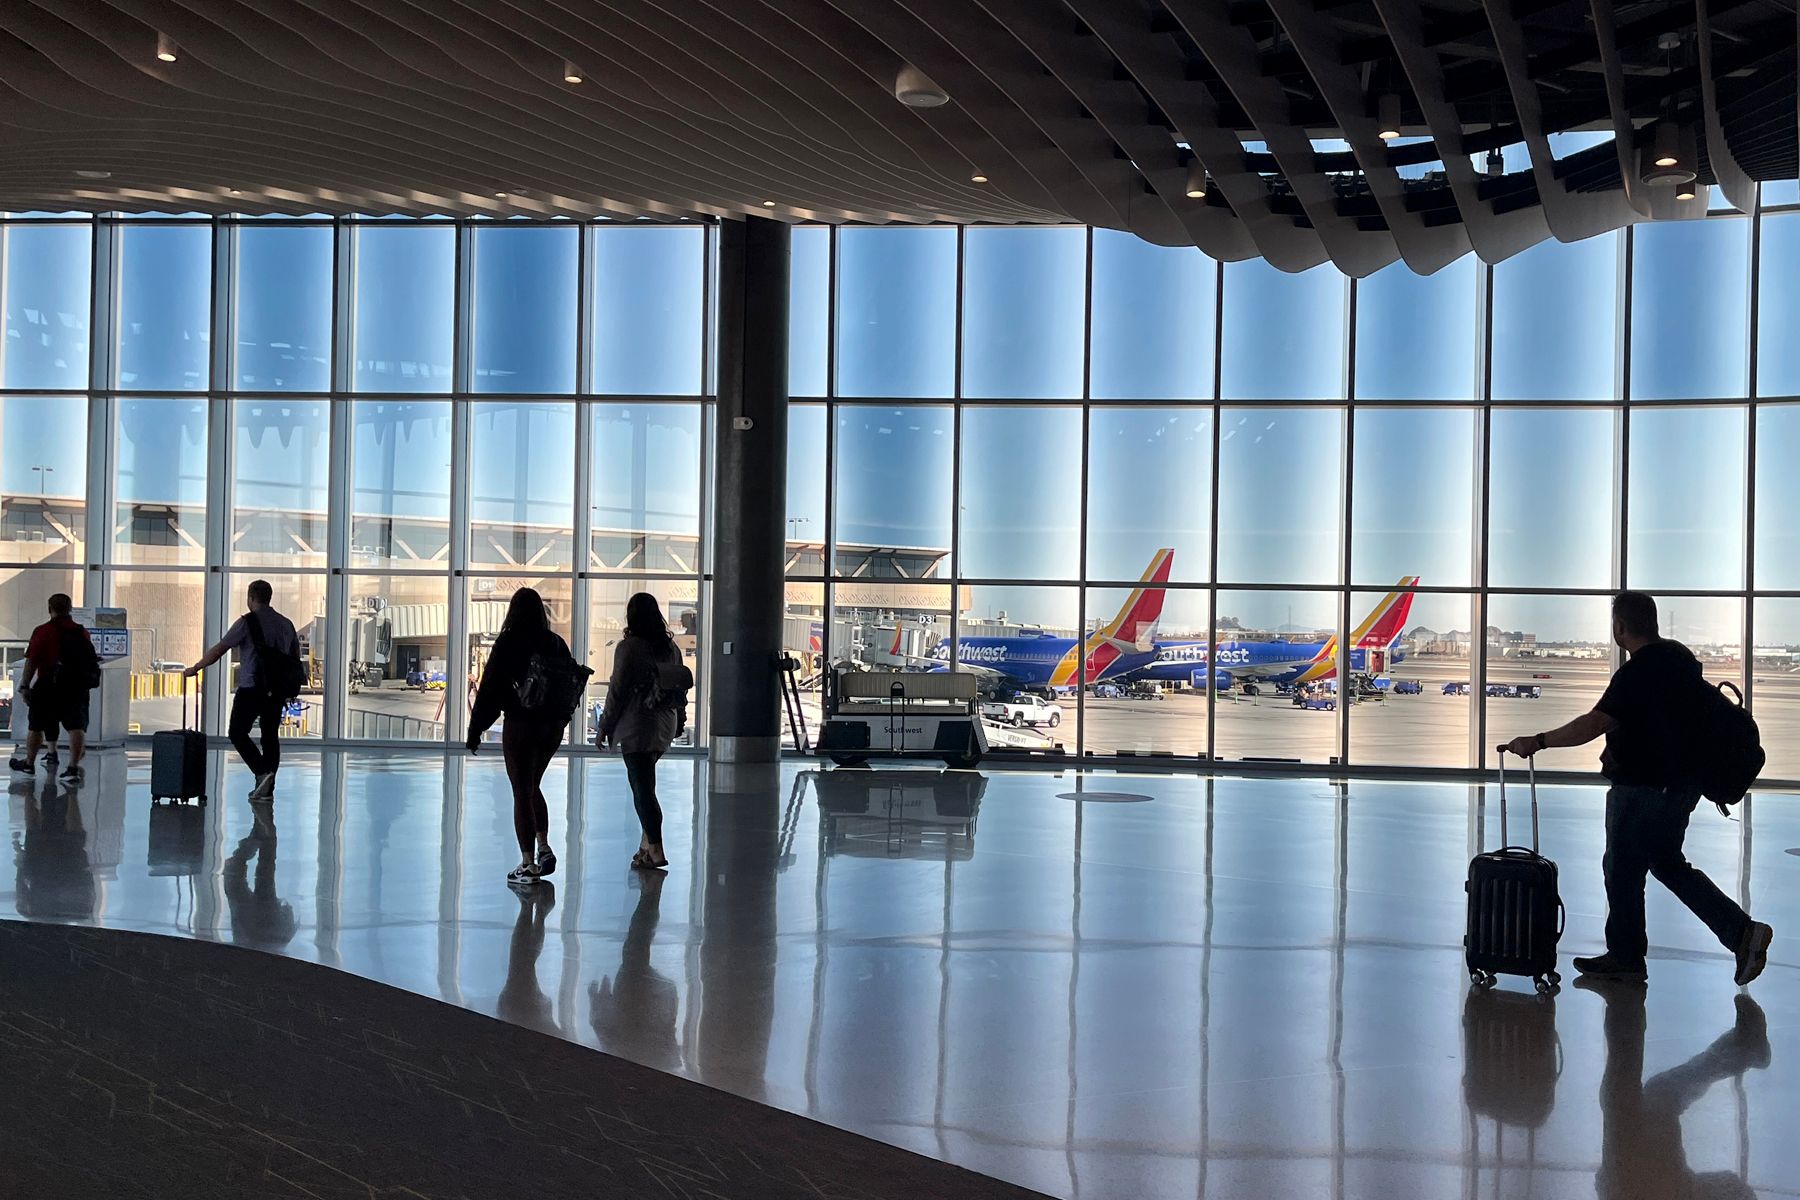 Passengers walking through an airport terminal, with multipl Southwest Airlines aircraft seen out the window.